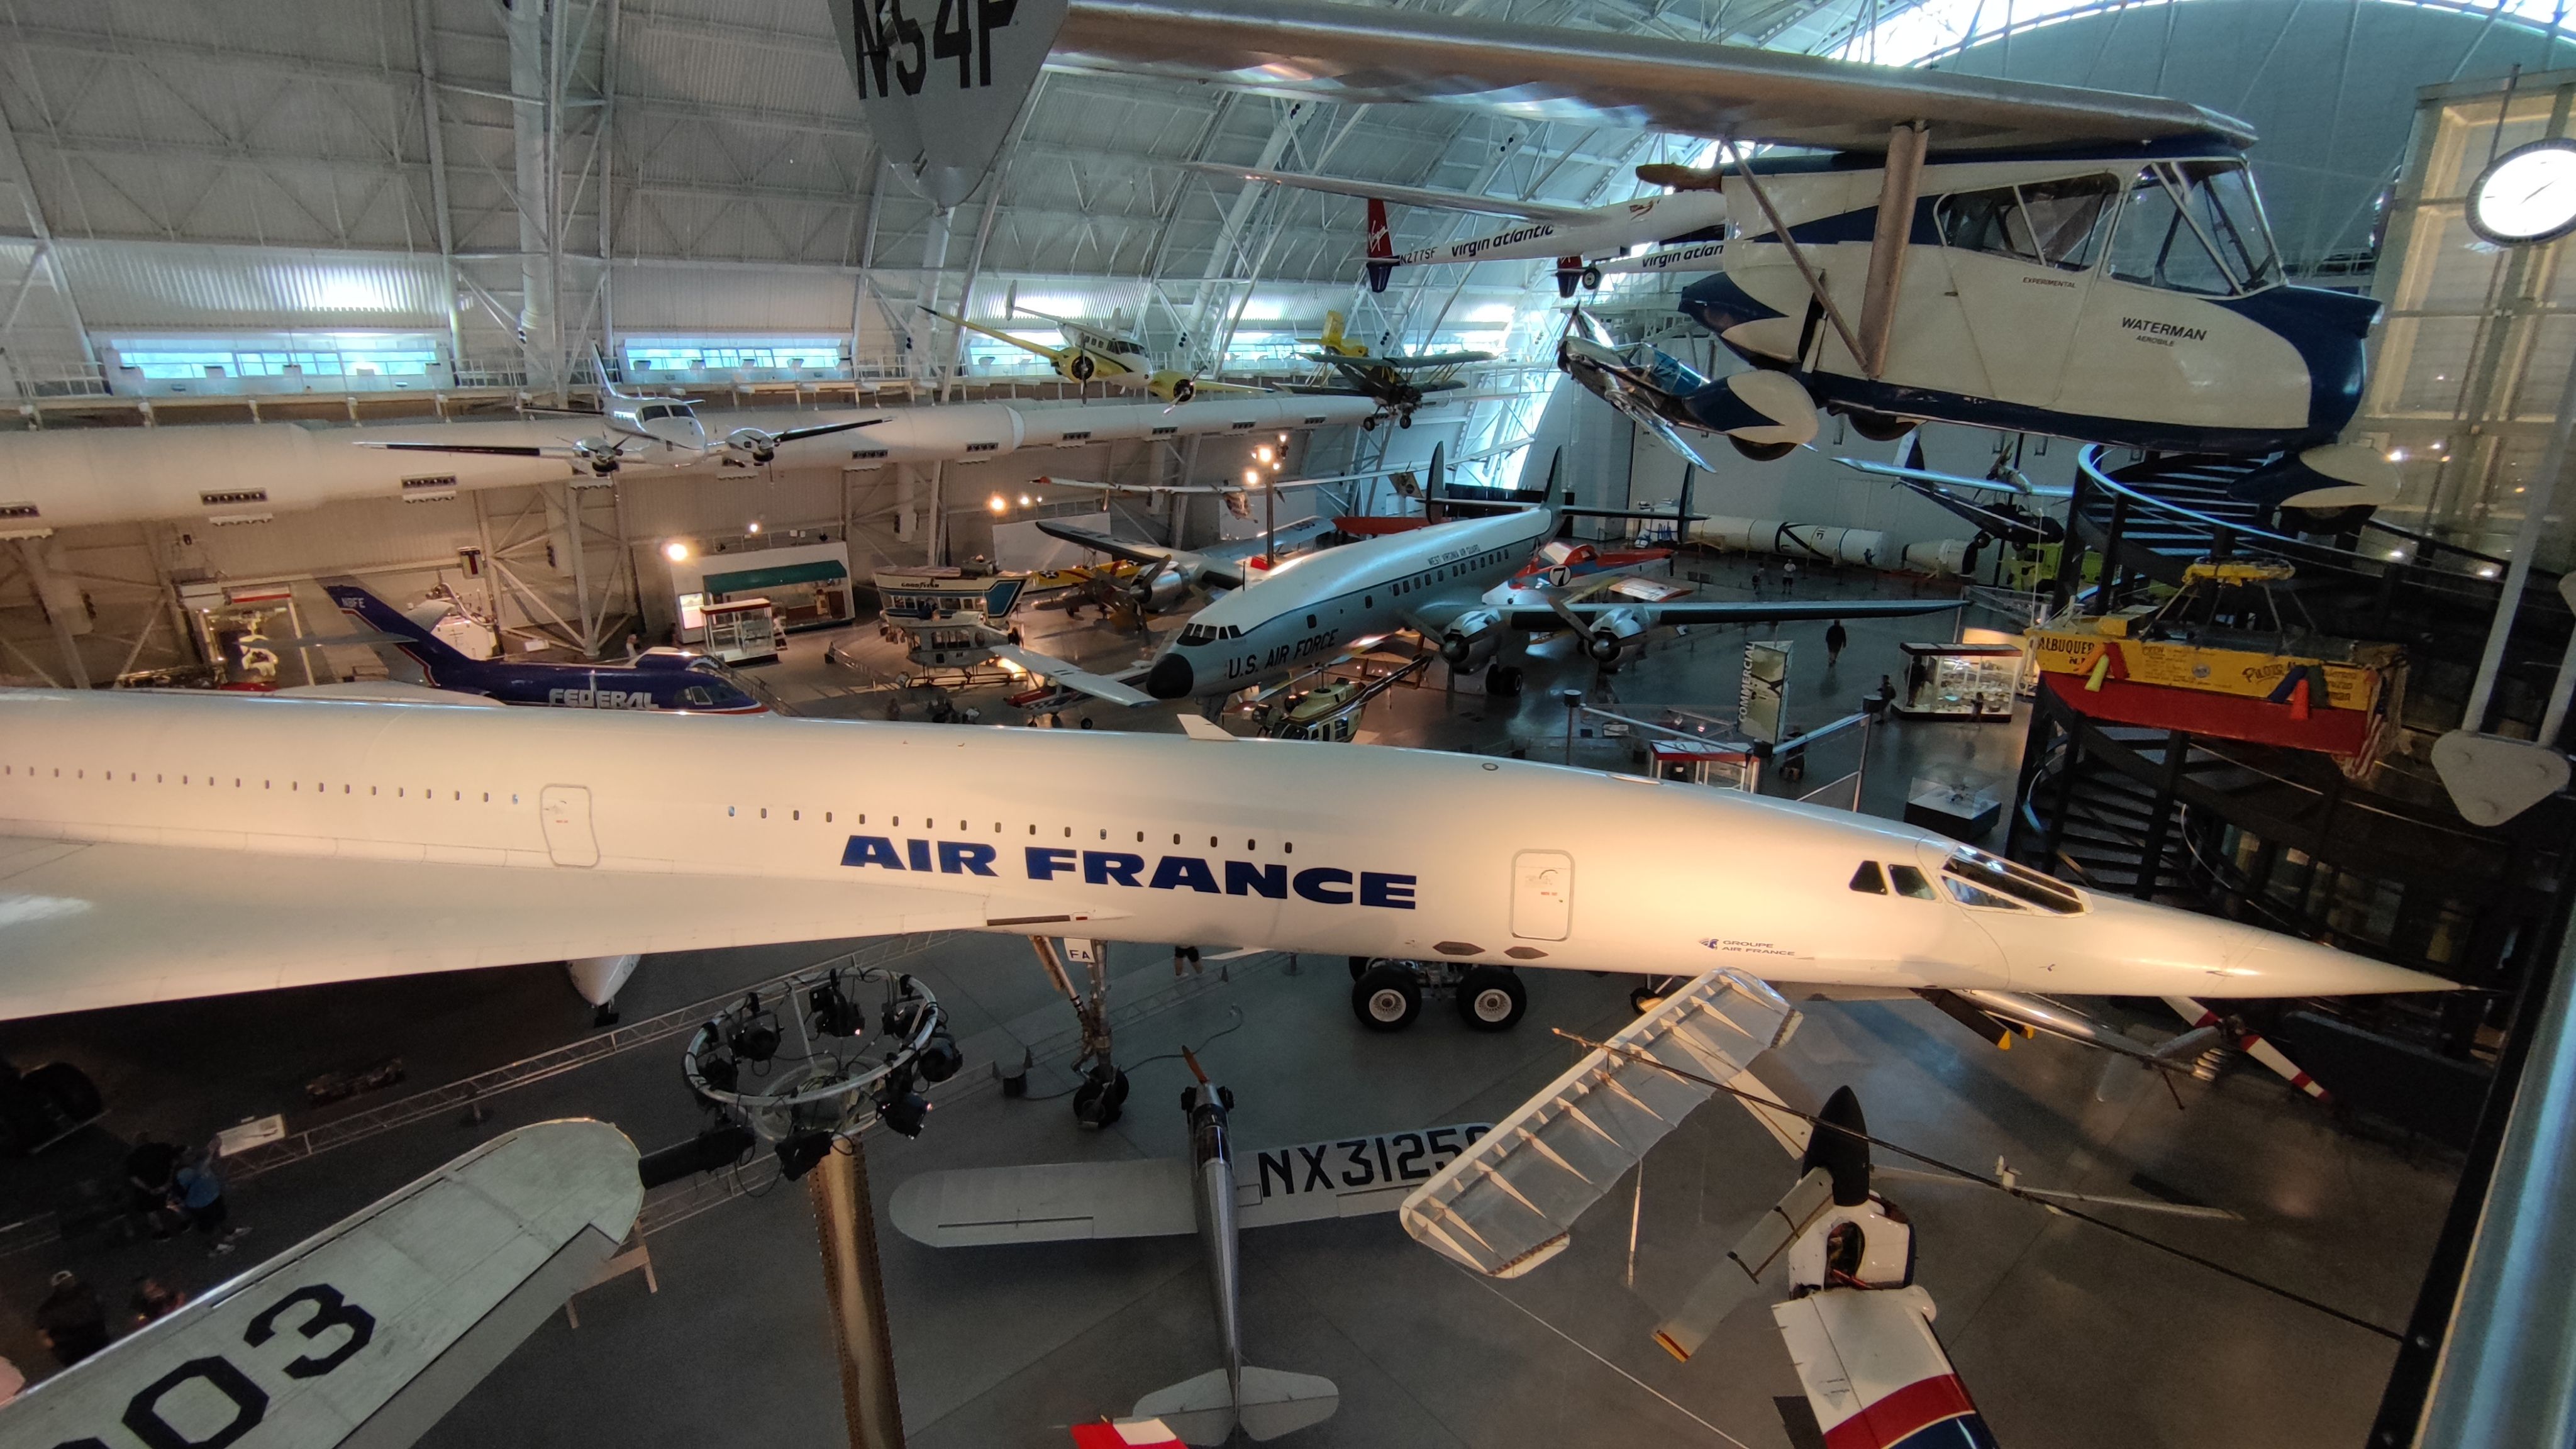 A view of an Air France Concorde on display at the Smithsonian Air & Space Museum near Washington D.C. 